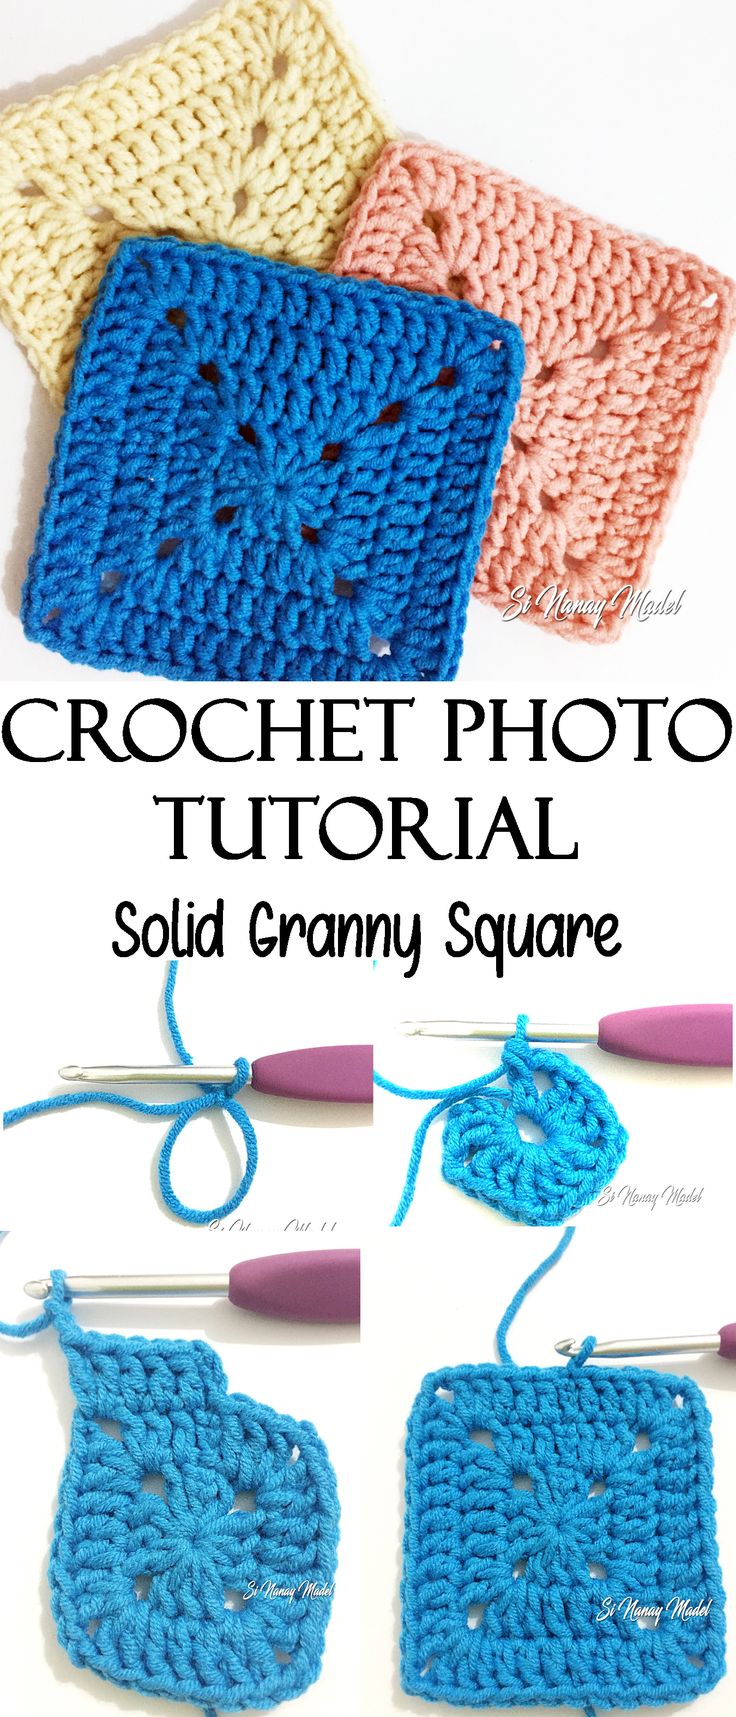 the crochet photo is shown in three different colors